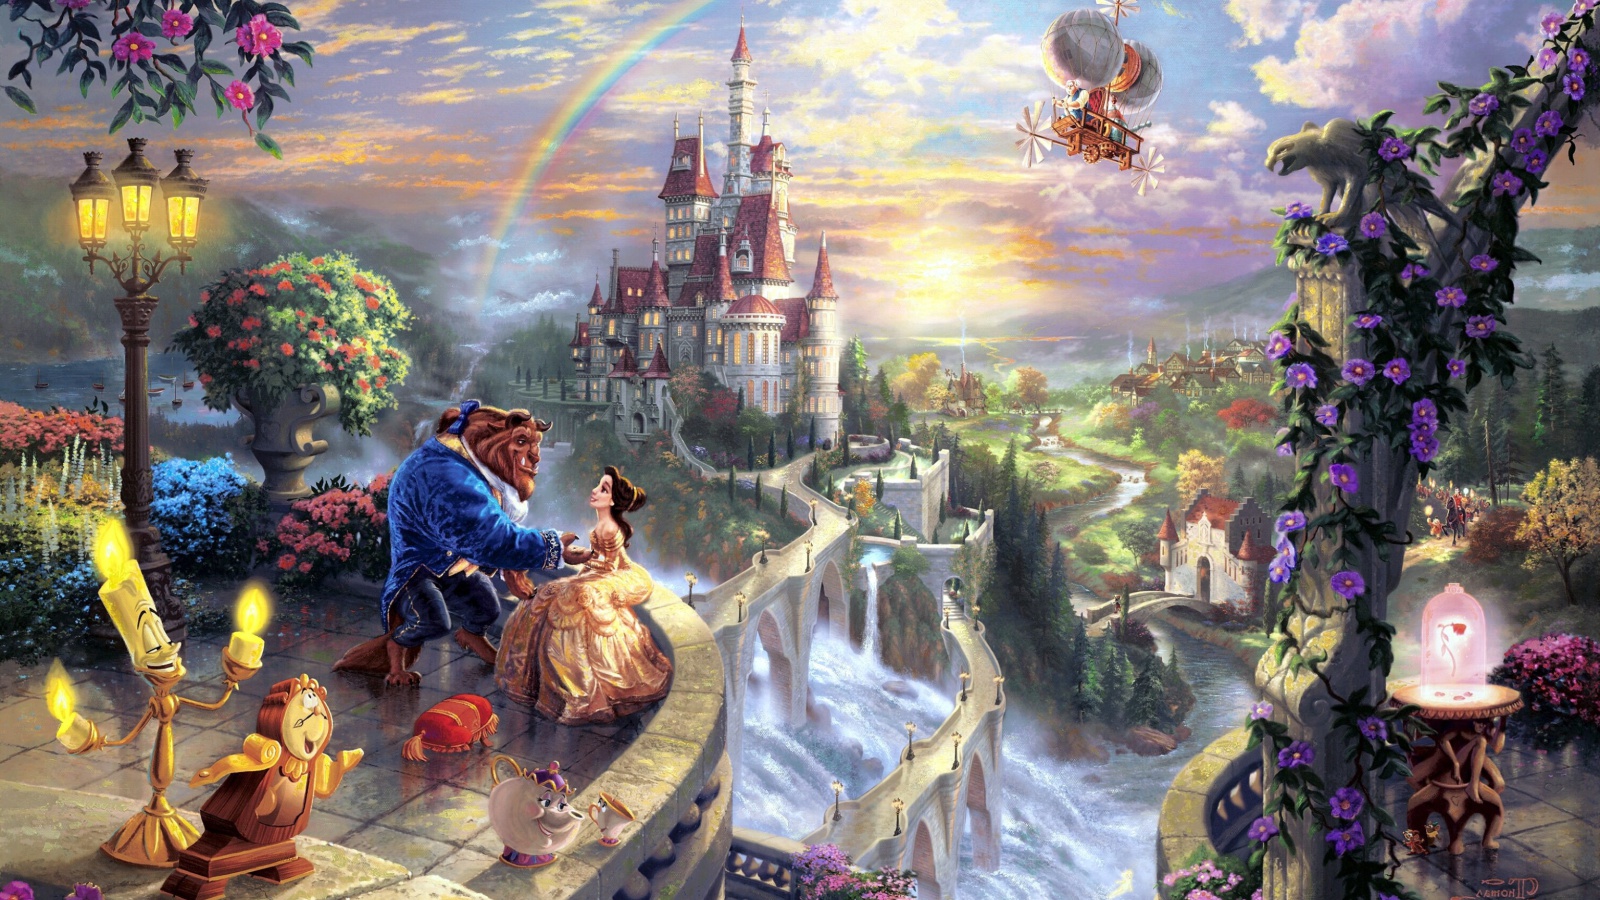 Das Beauty and the Beast Wallpaper 1600x900